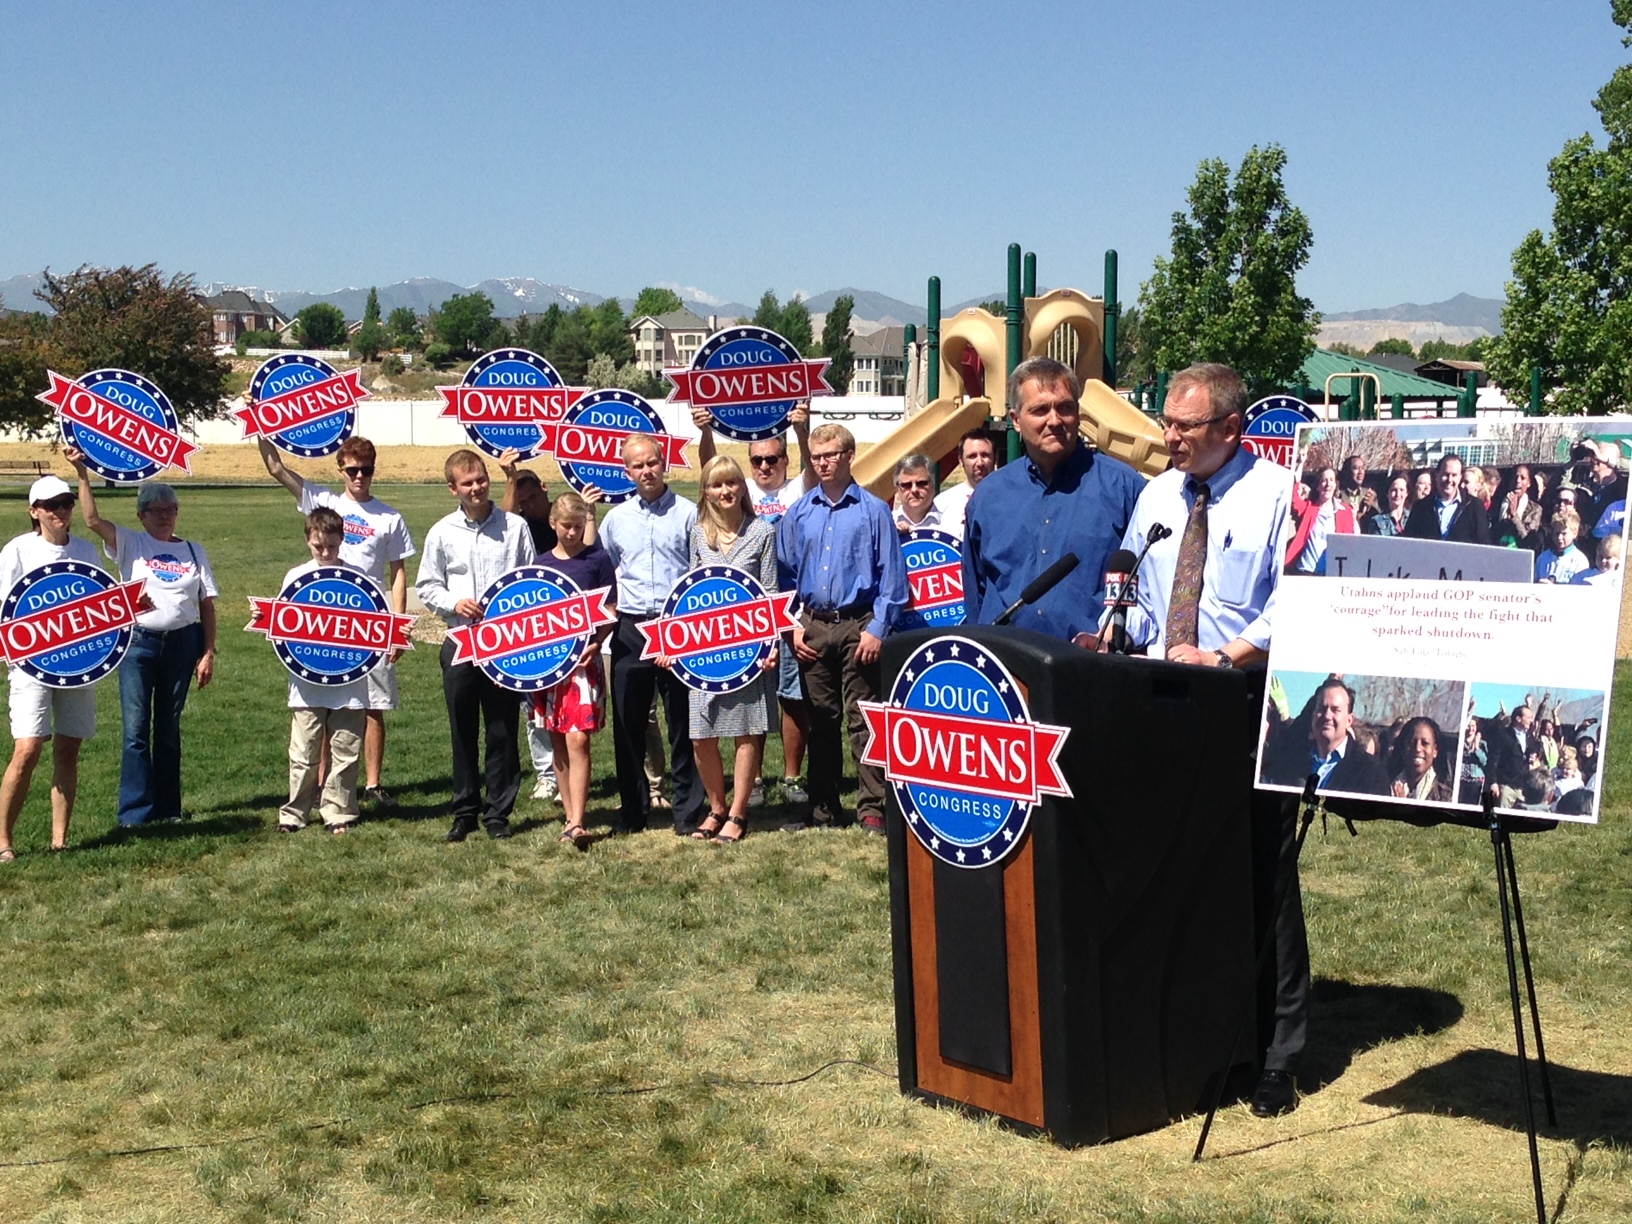 U.S. Rep. Jim Matheson (left) listens to Democratic congressional candidate Doug Owens at a press conference on June 3, 2014.